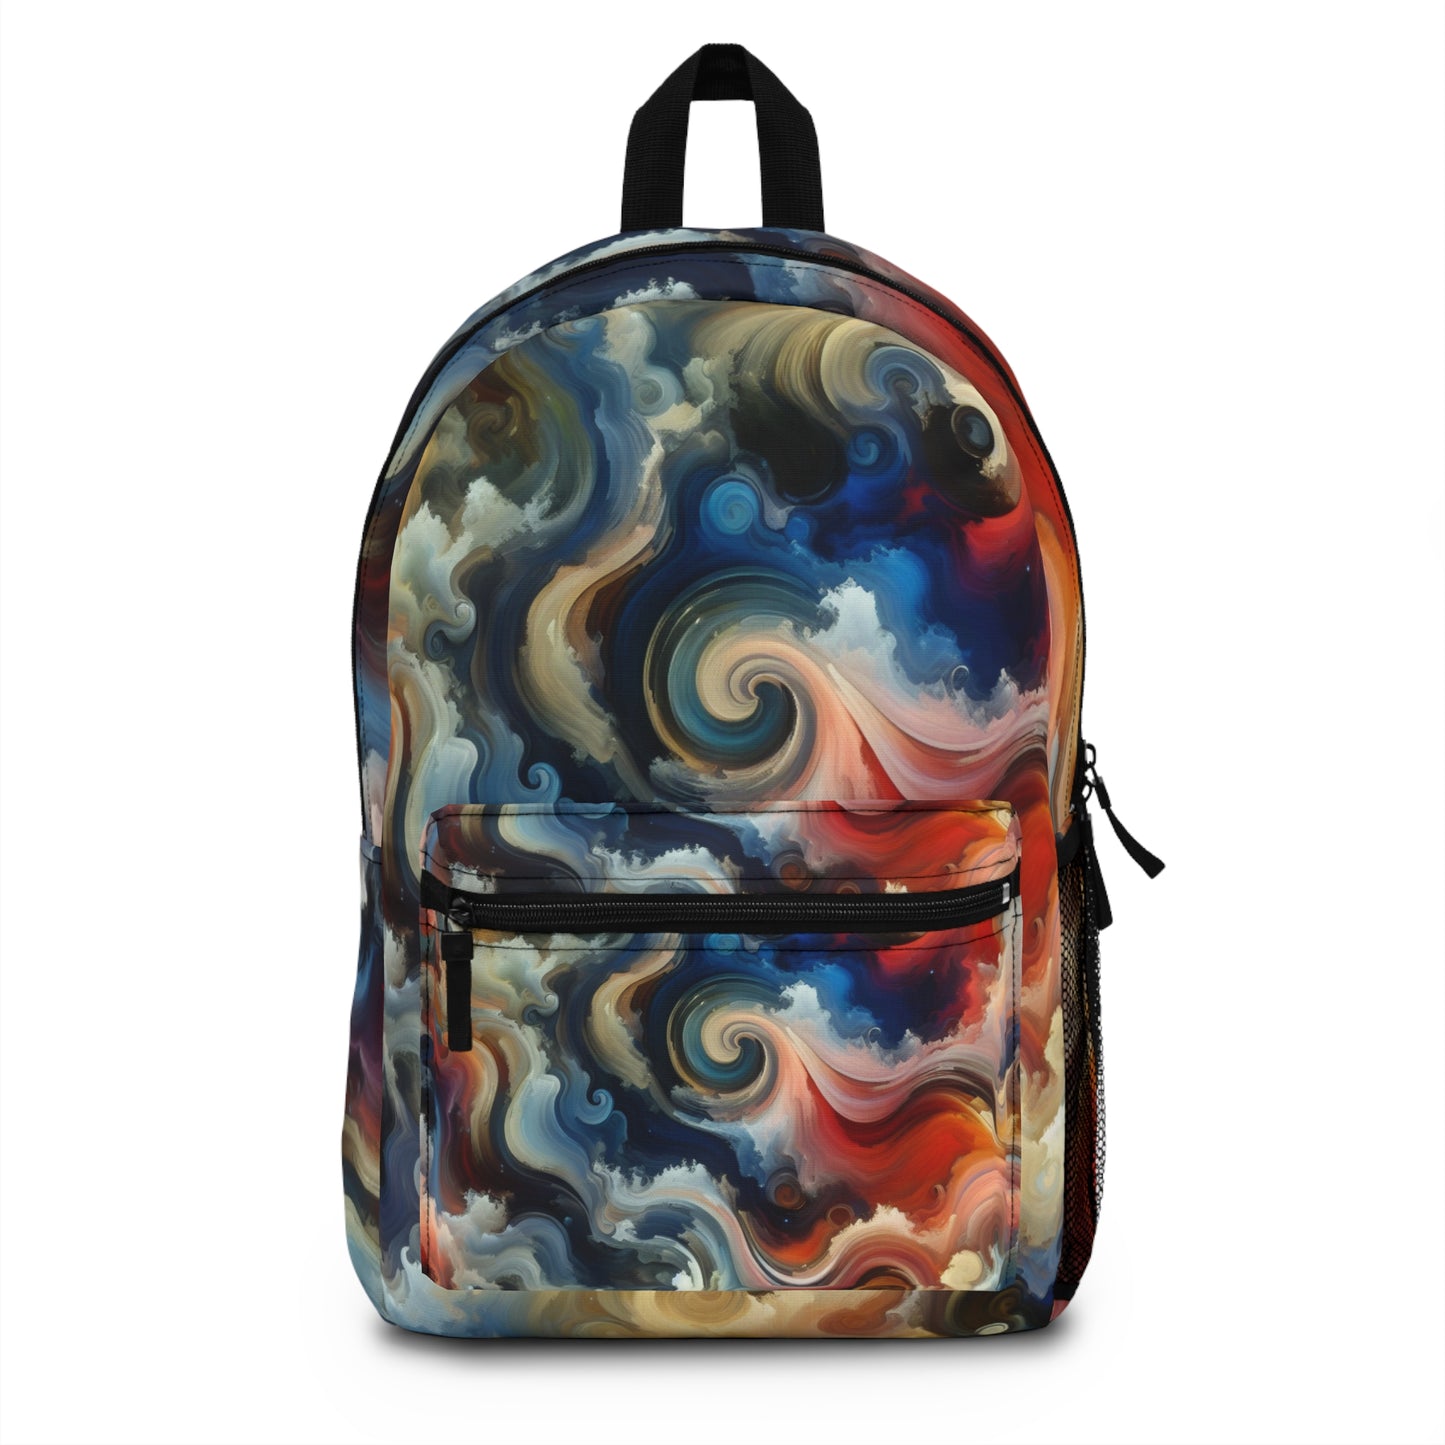 "Chaotic Balance: A Universe of Color" - The Alien Backpack Abstract Art Style